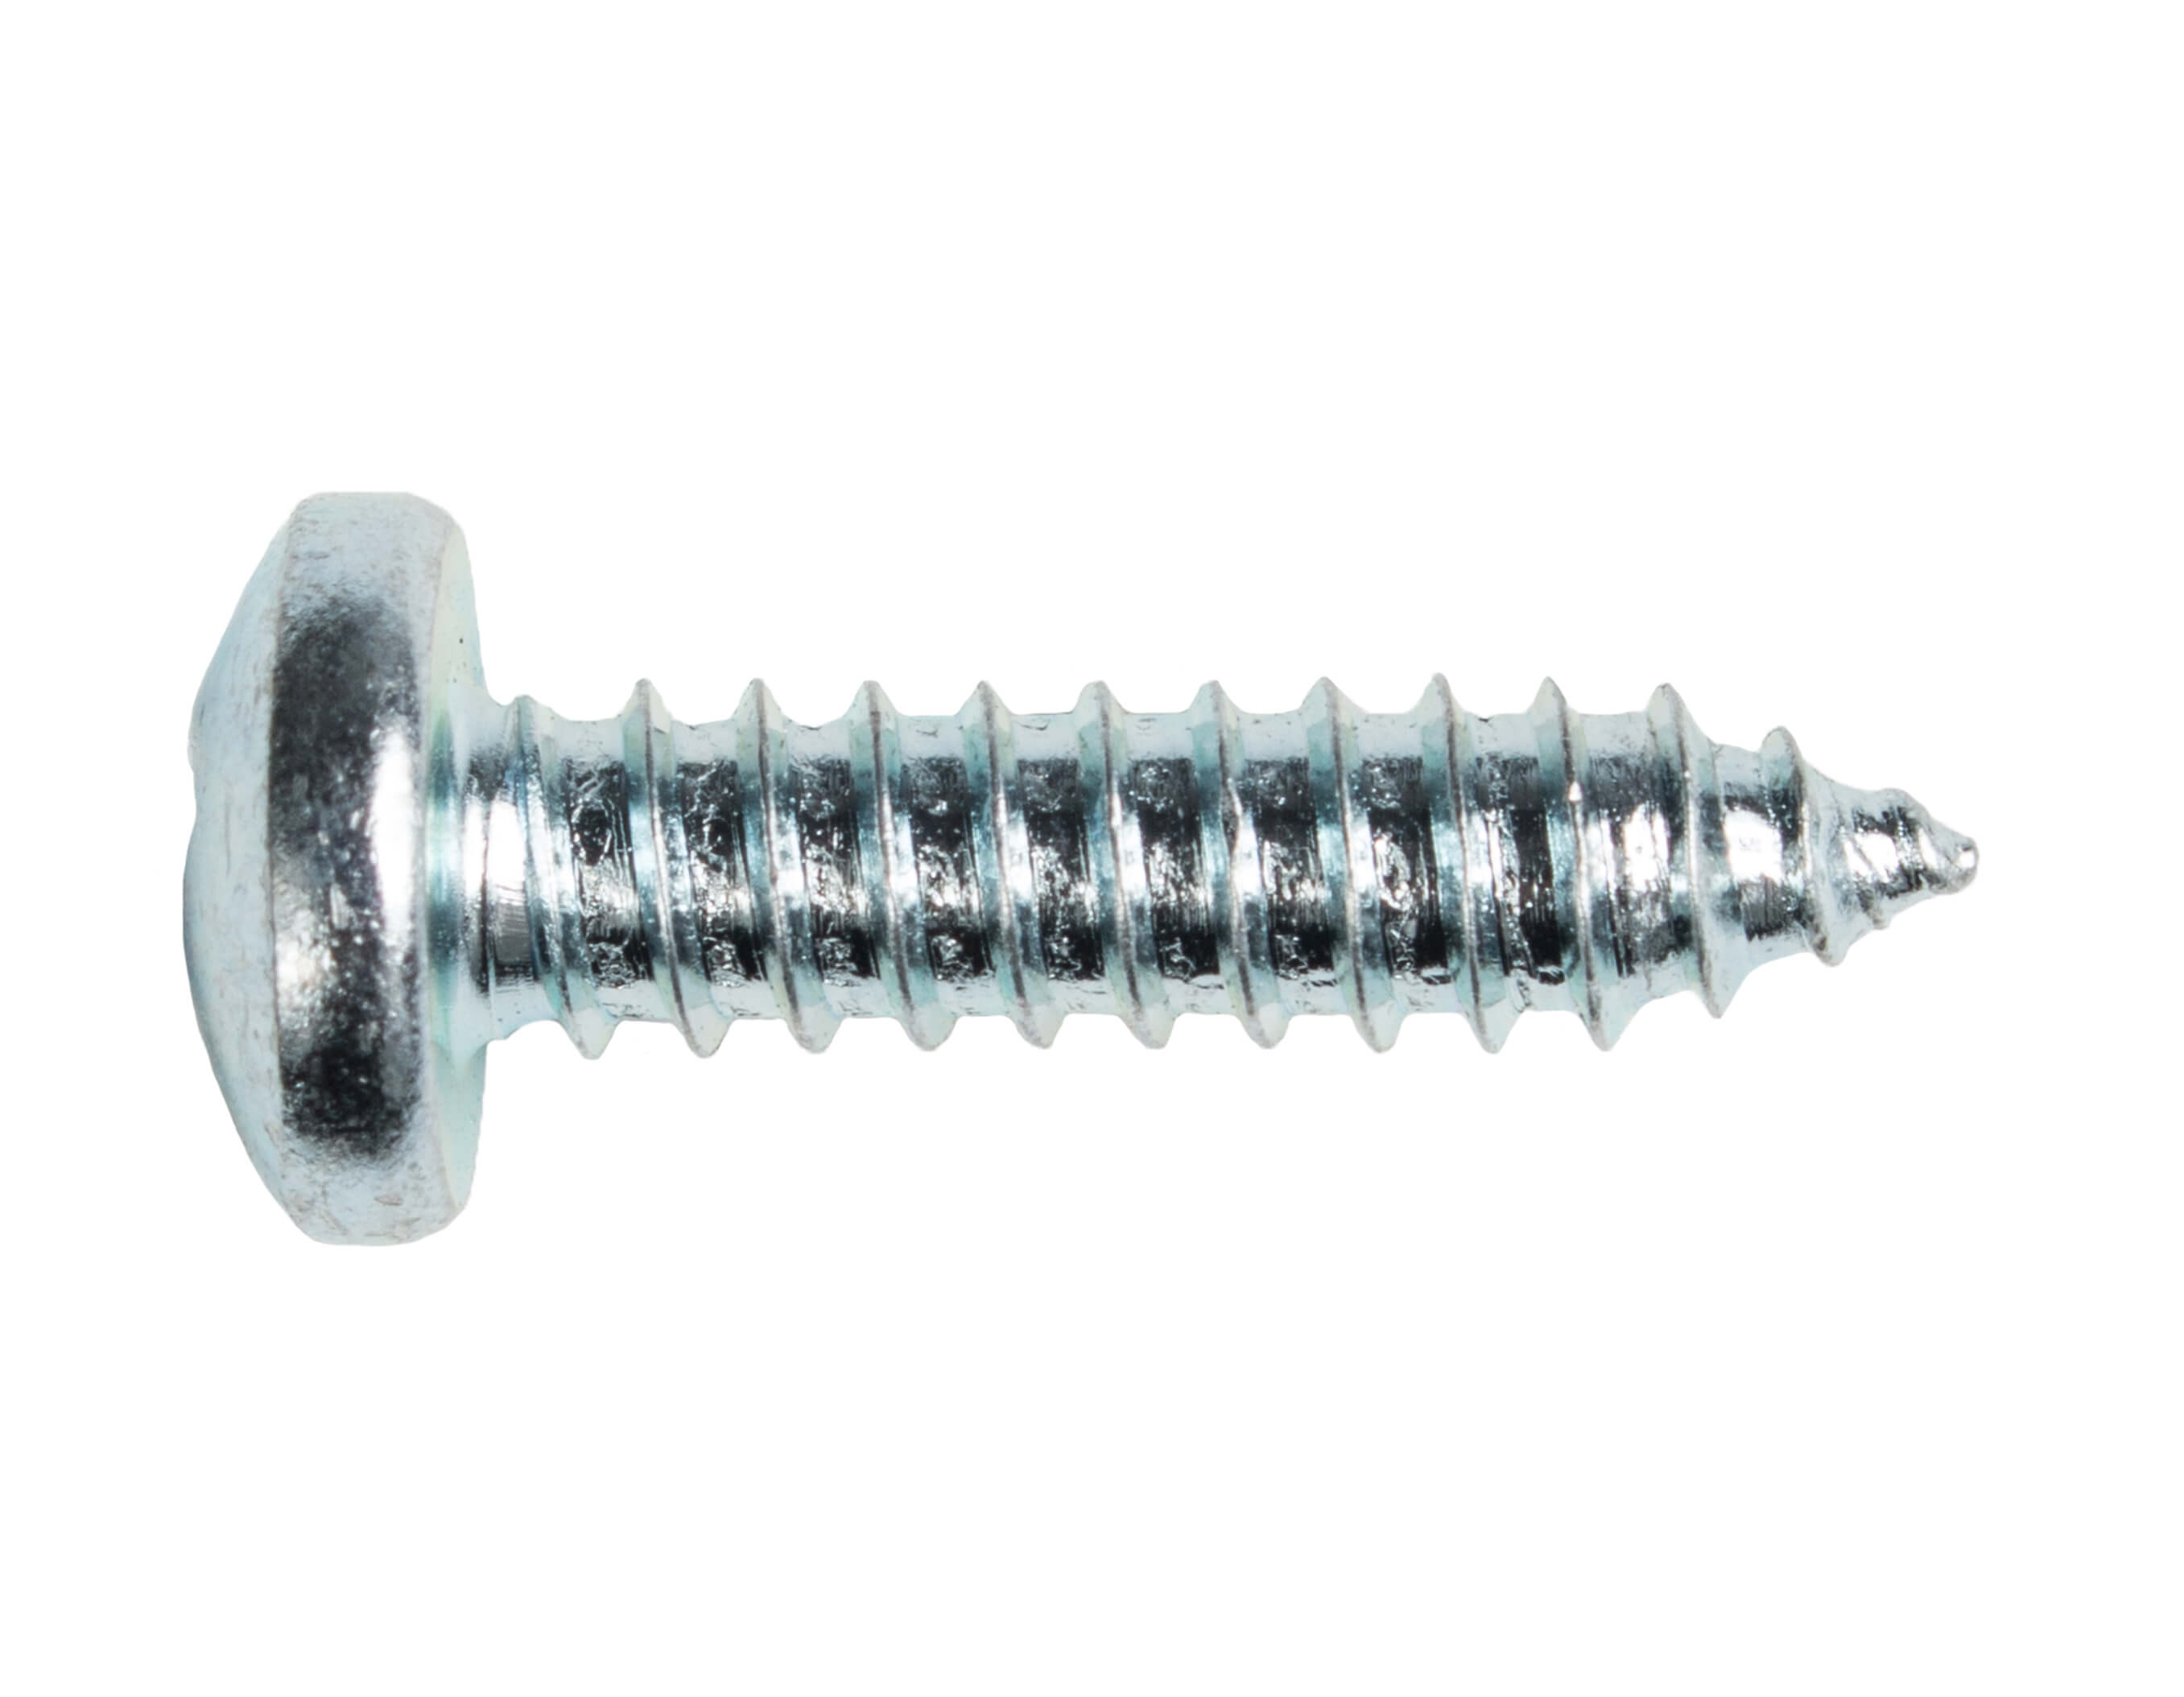 4.2X9.5 SMS (TAPPING) SCREW PAN PH ZN DIN7981